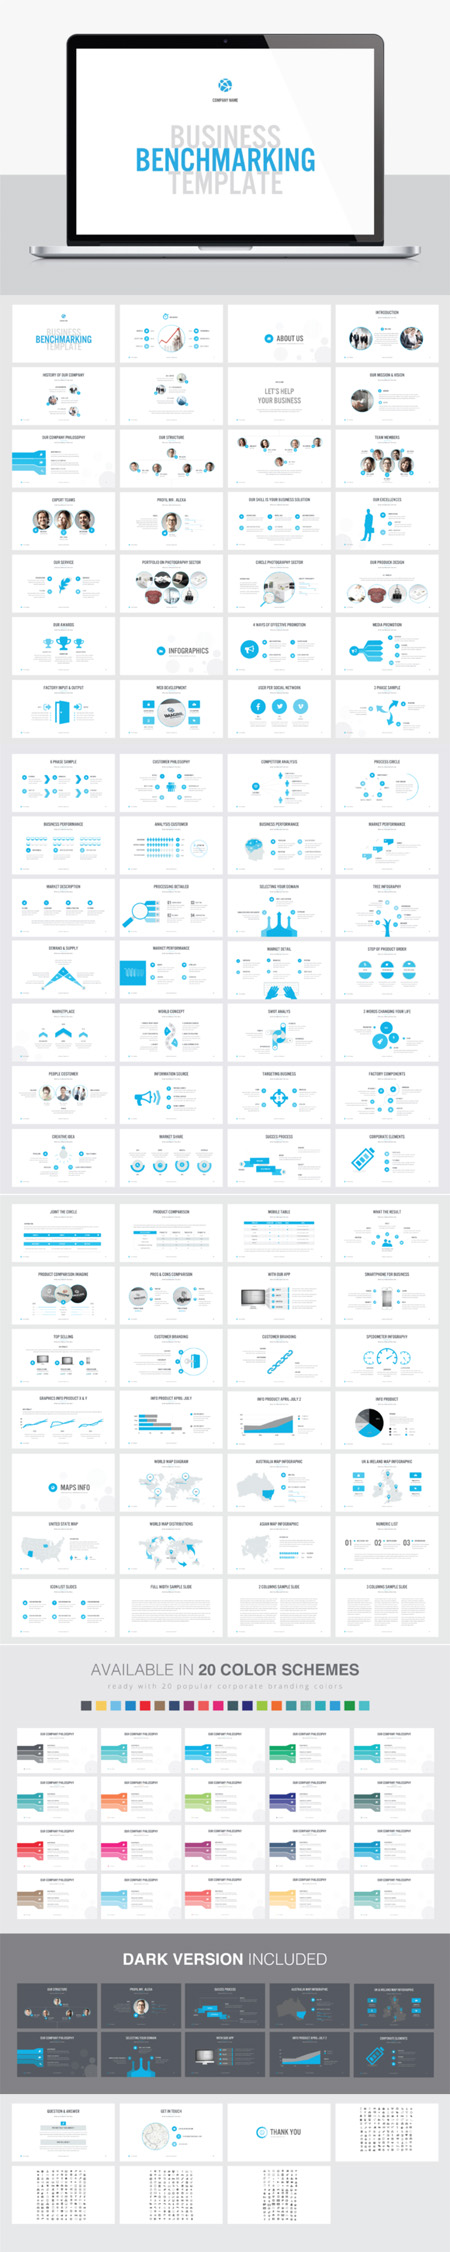 CM - BENCHMARKING PowerPoint Template 470870